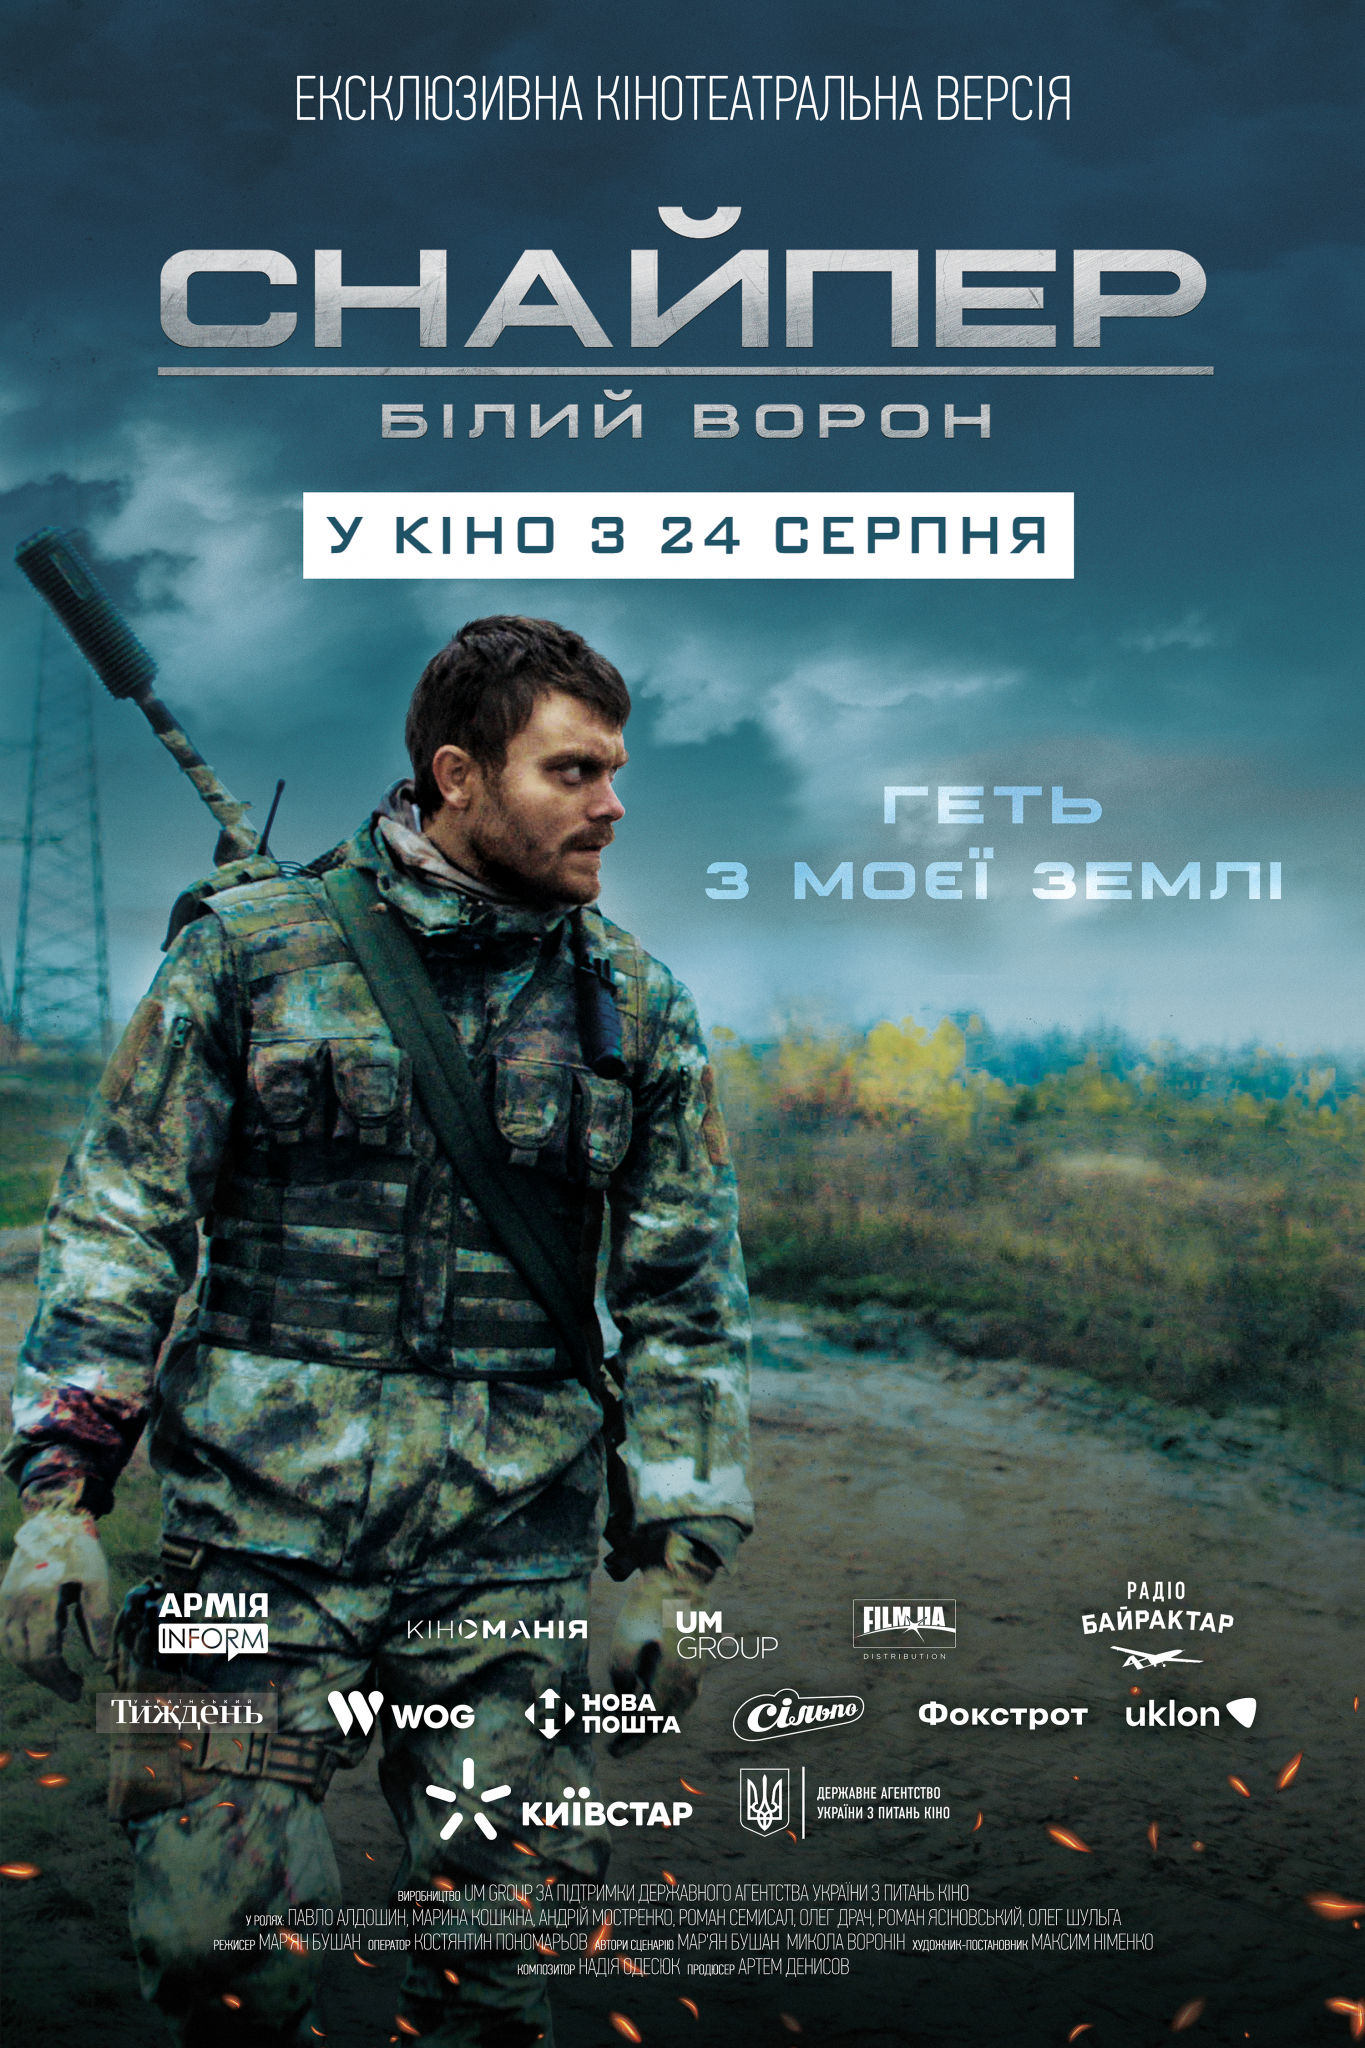 priest conjunction lift Sniper: The White Raven - Projects - Production - FILM.UA Group